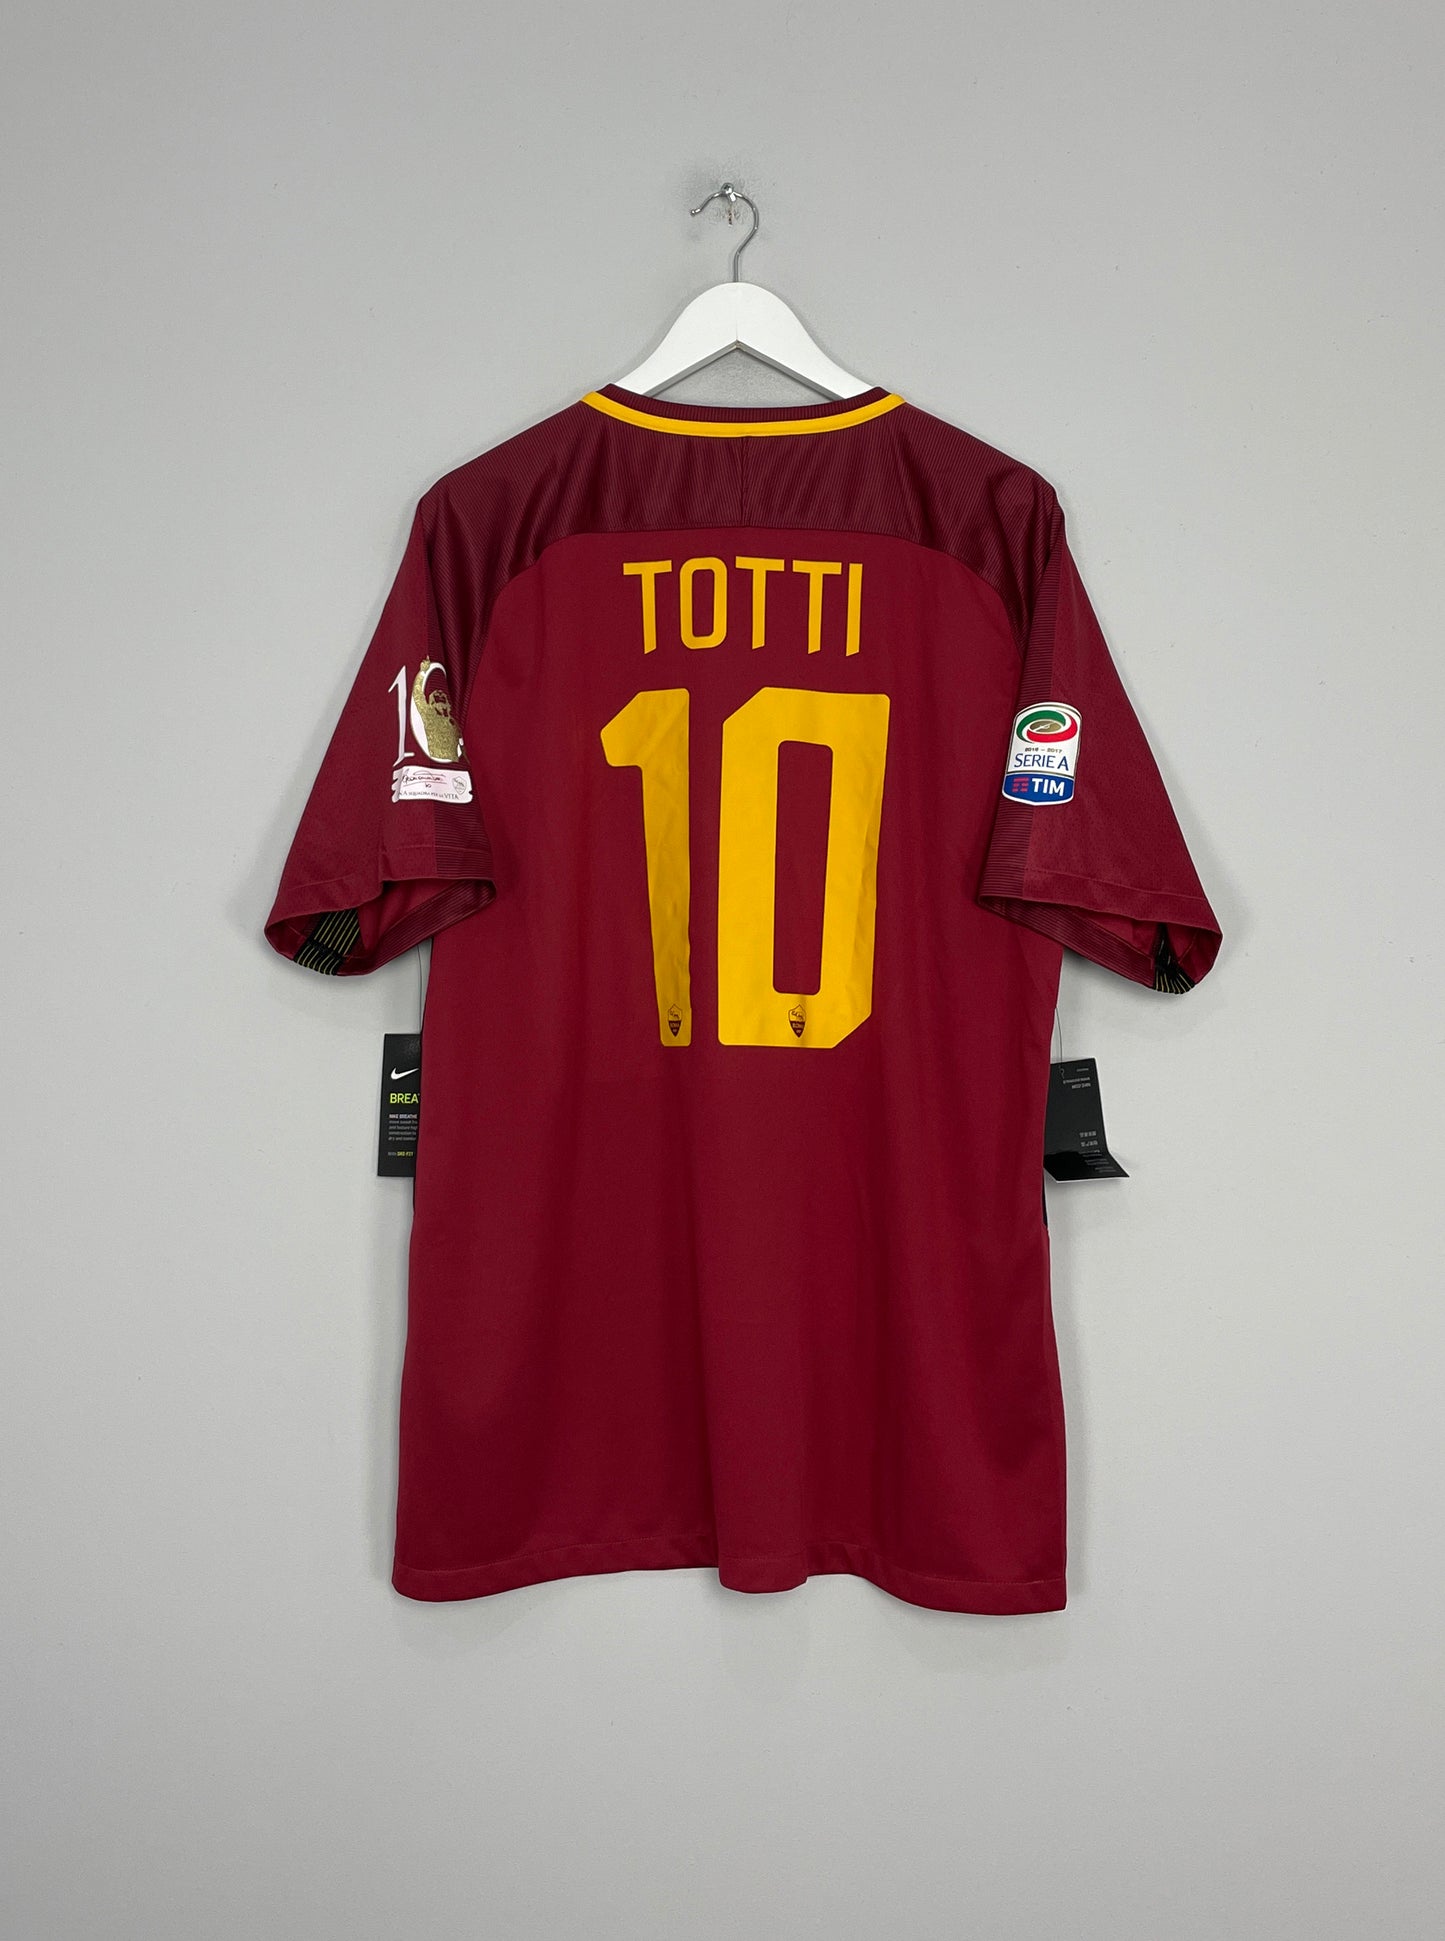 Image of the Roma Totti shirt from the 2017/18 season